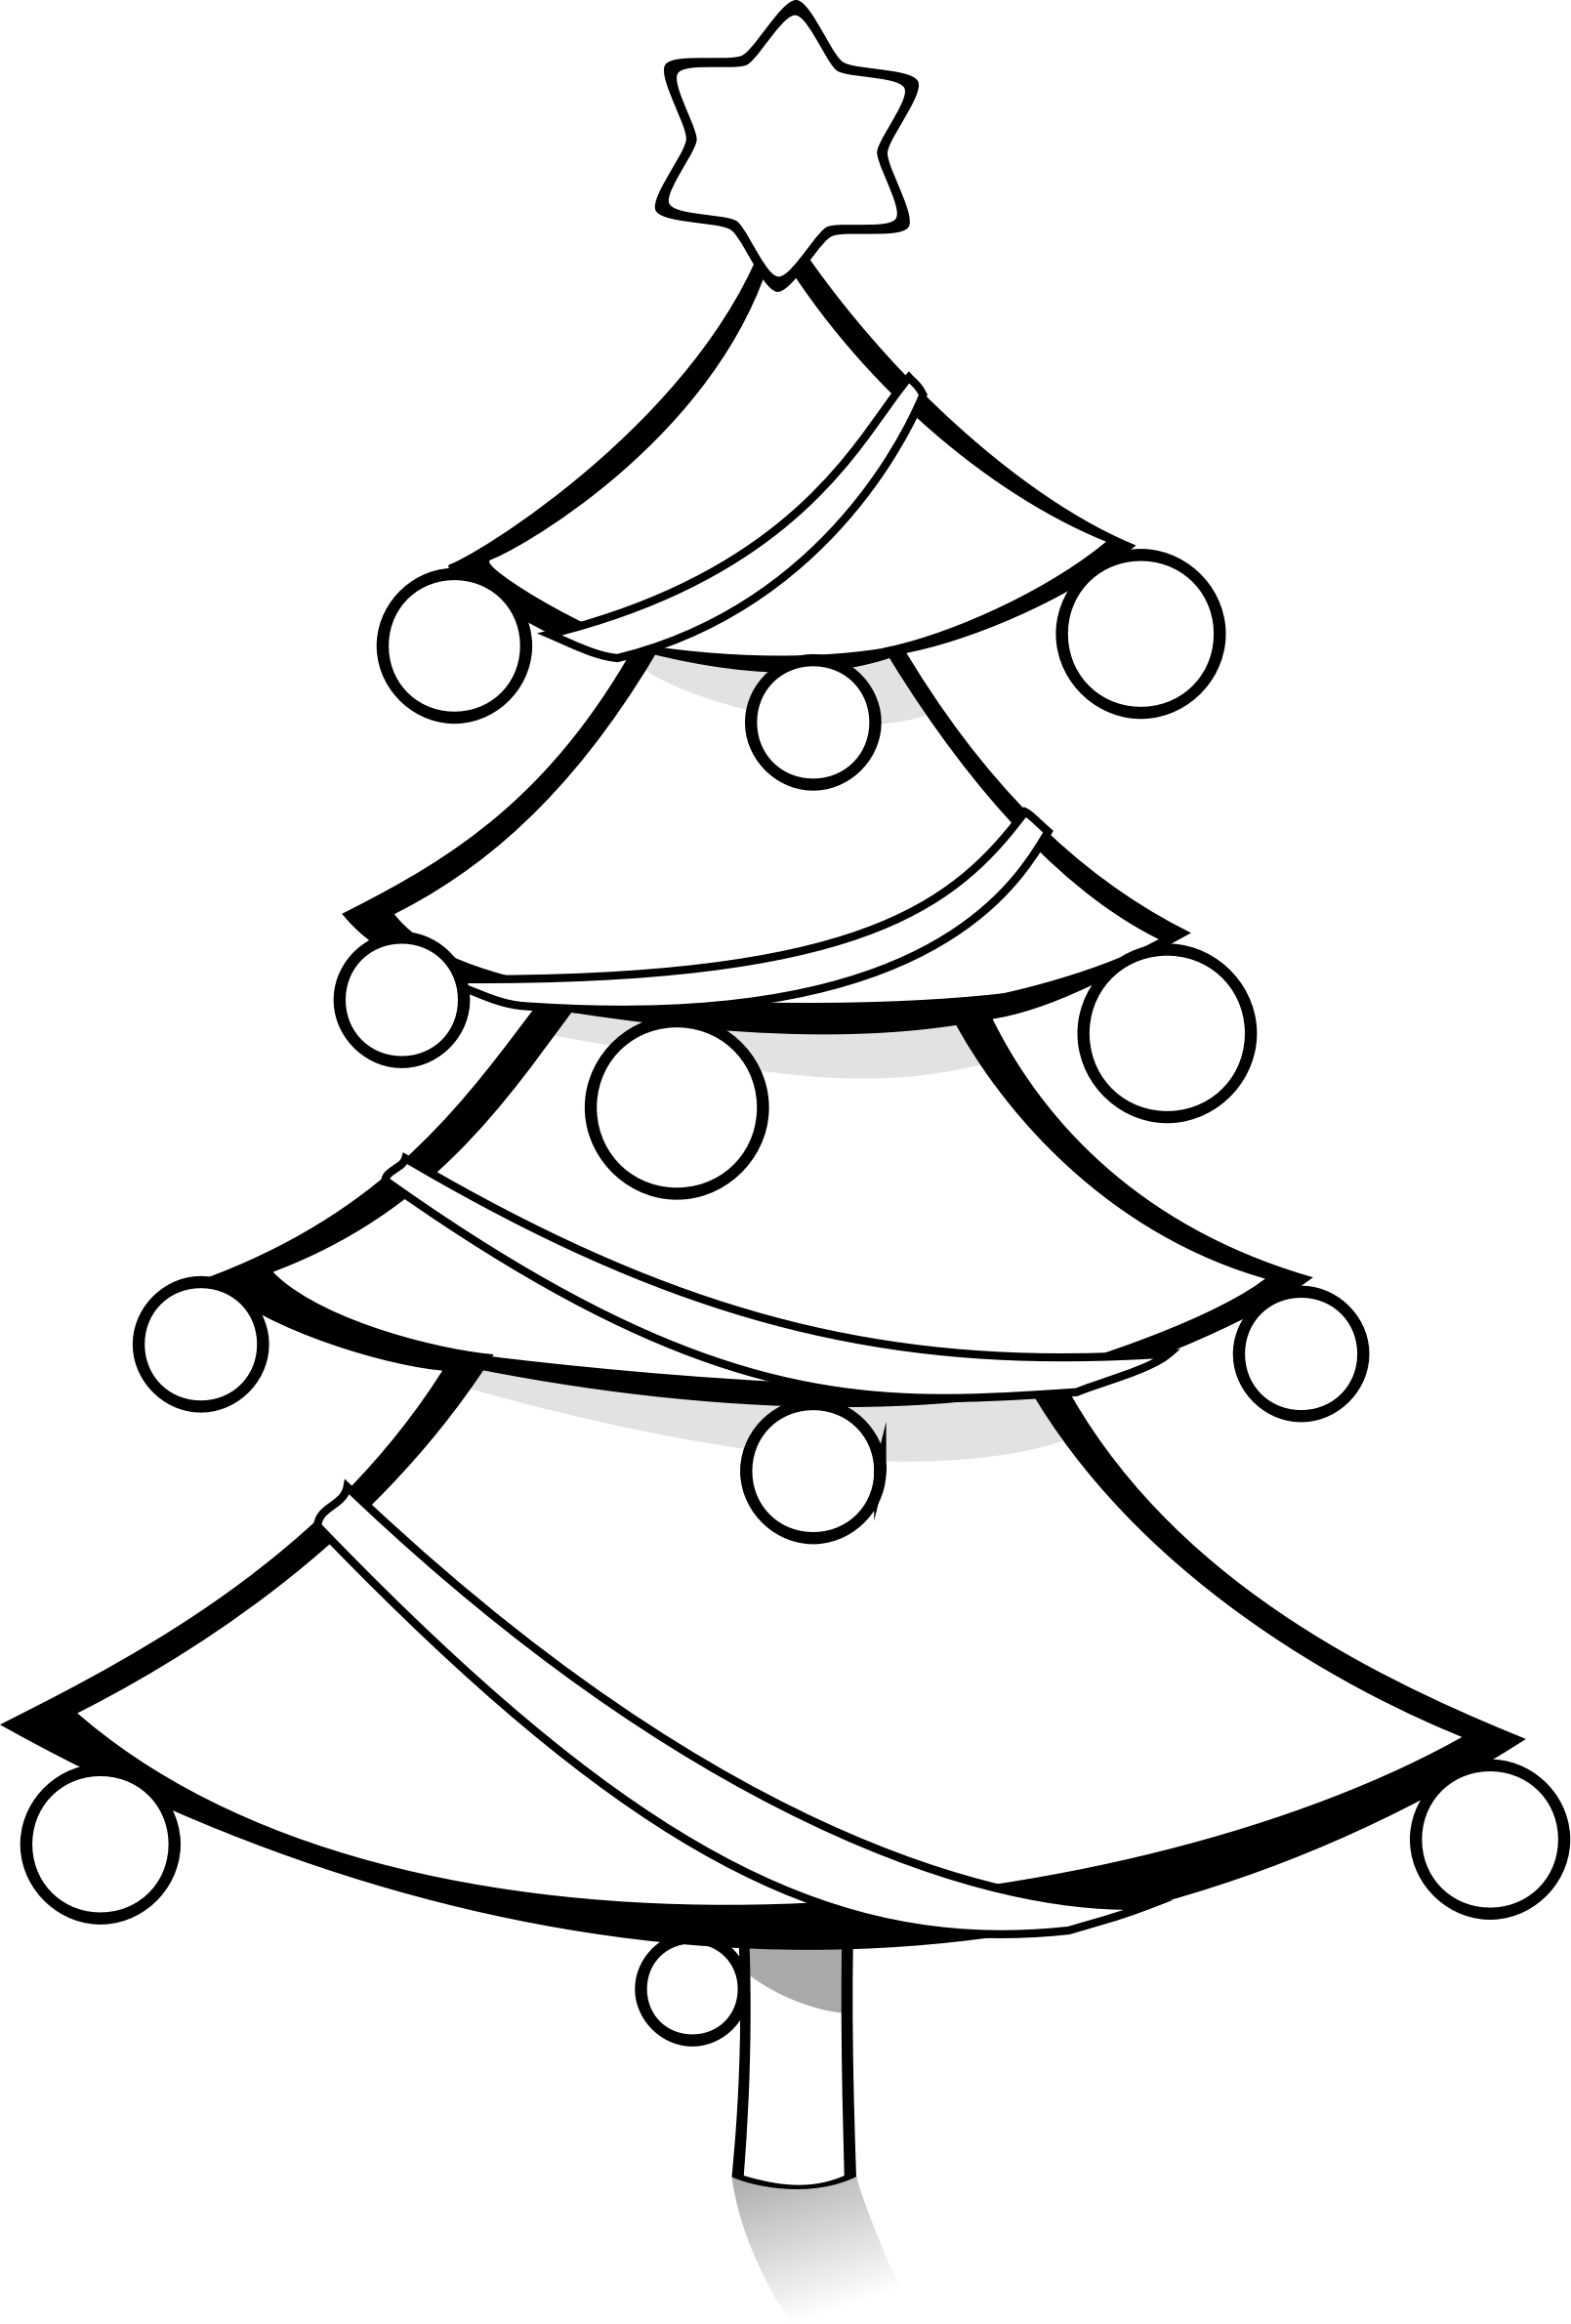 Free Christmas Tree Clip Art Black And White, Download Free Christmas ...